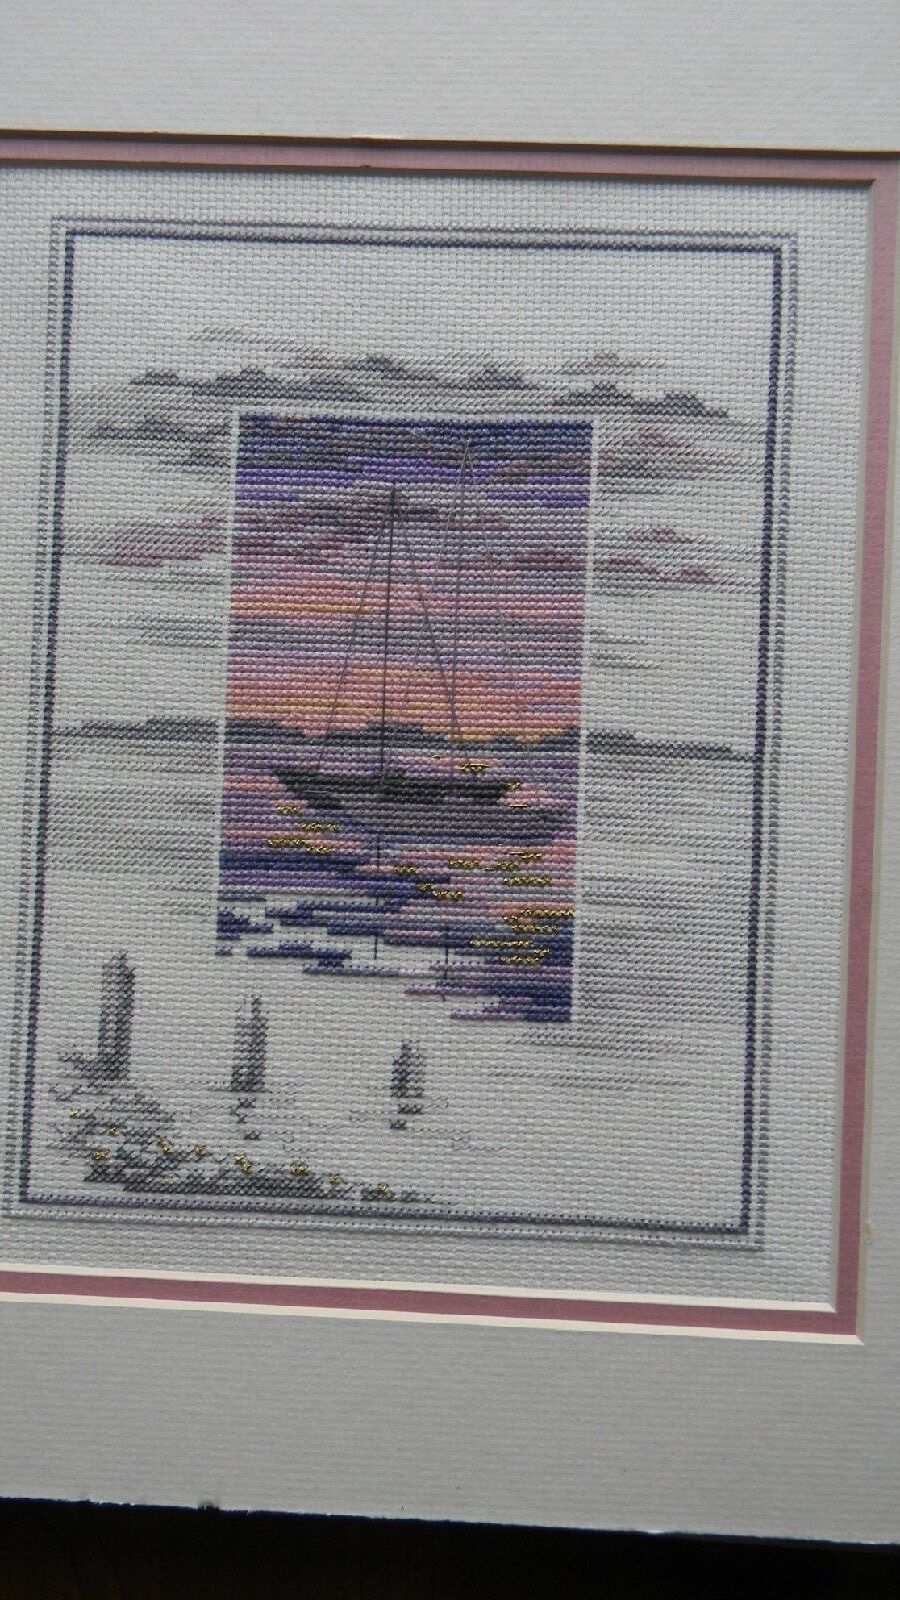 Completed SWALWELL Needle Treasures Cross Stitch SUNSET - WATER'S EDGE - JCA New